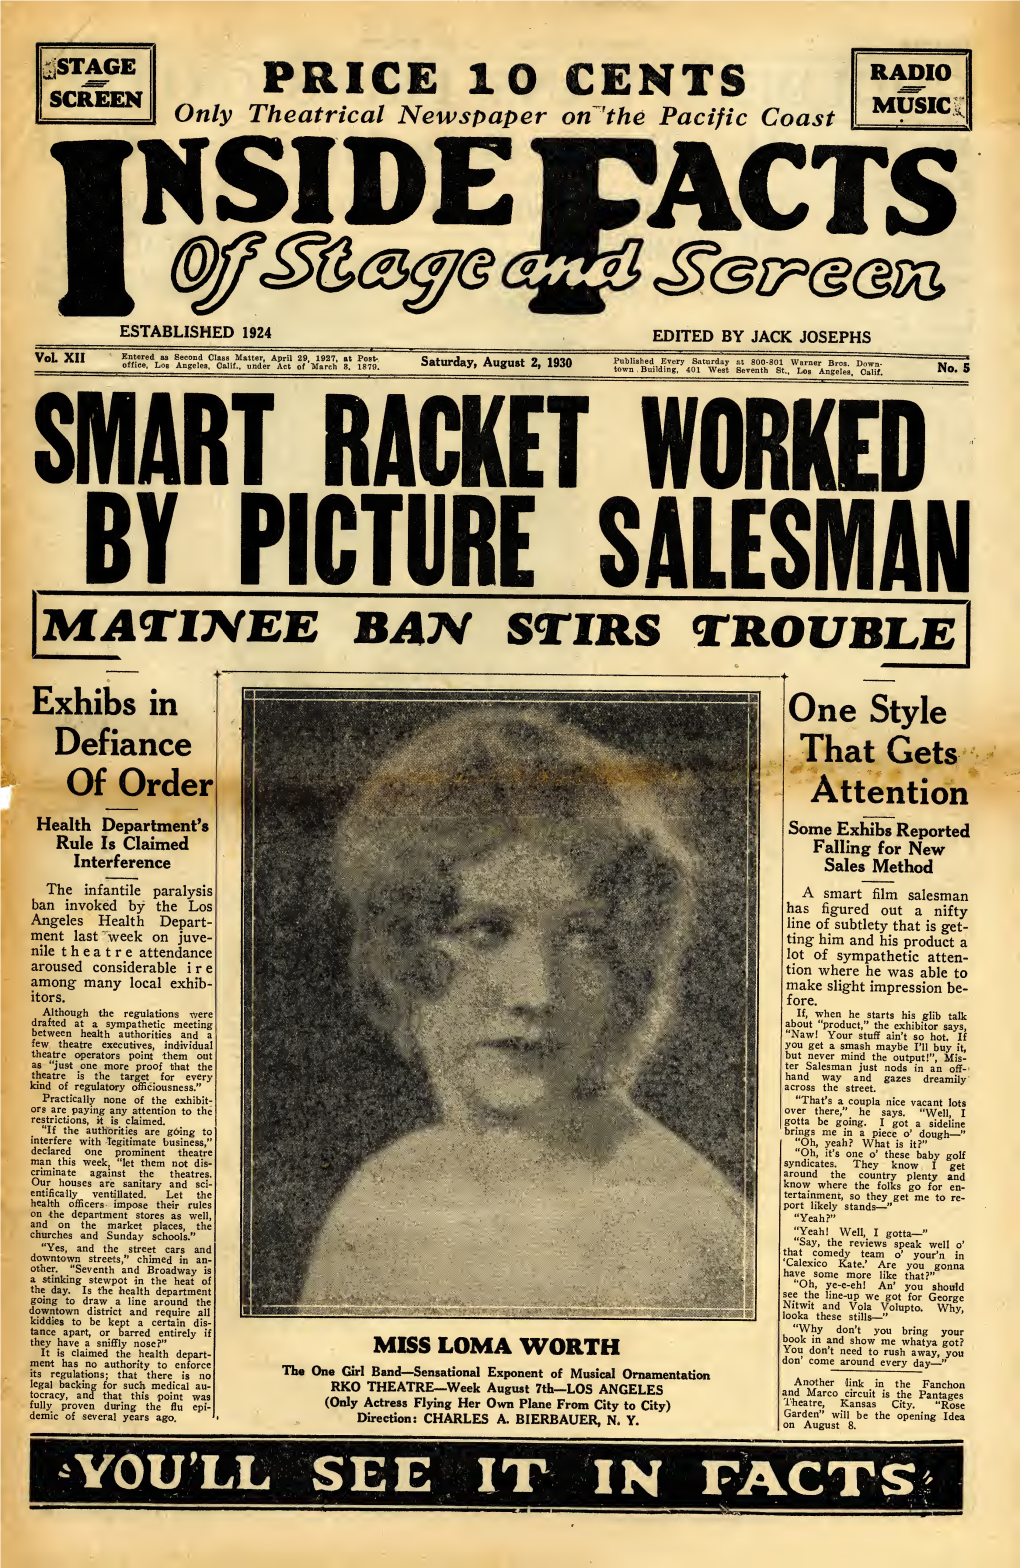 Inside Facts of Stage and Screen (August 2, 1930)